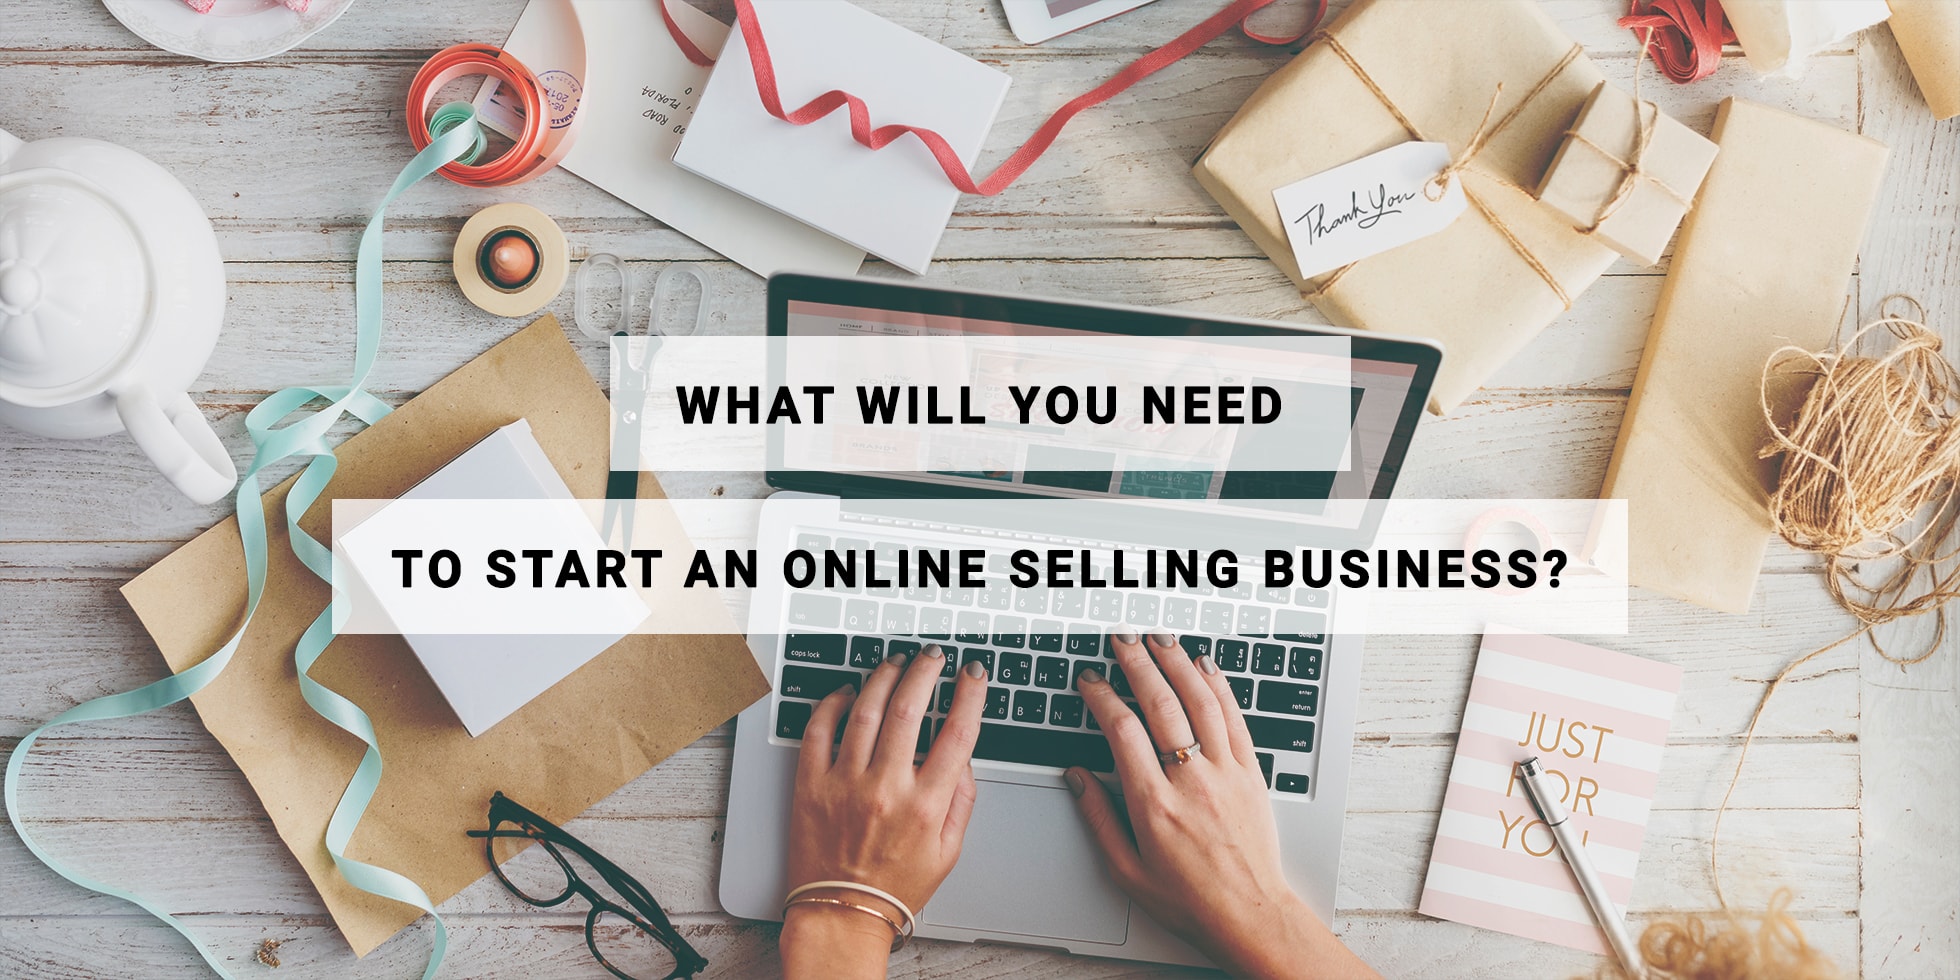 Amazon Com How To Start An Online Business A Step By Step To Make Money From Your Computer Even If Your Starting From Scratch How To Start An Online Business Startup Online